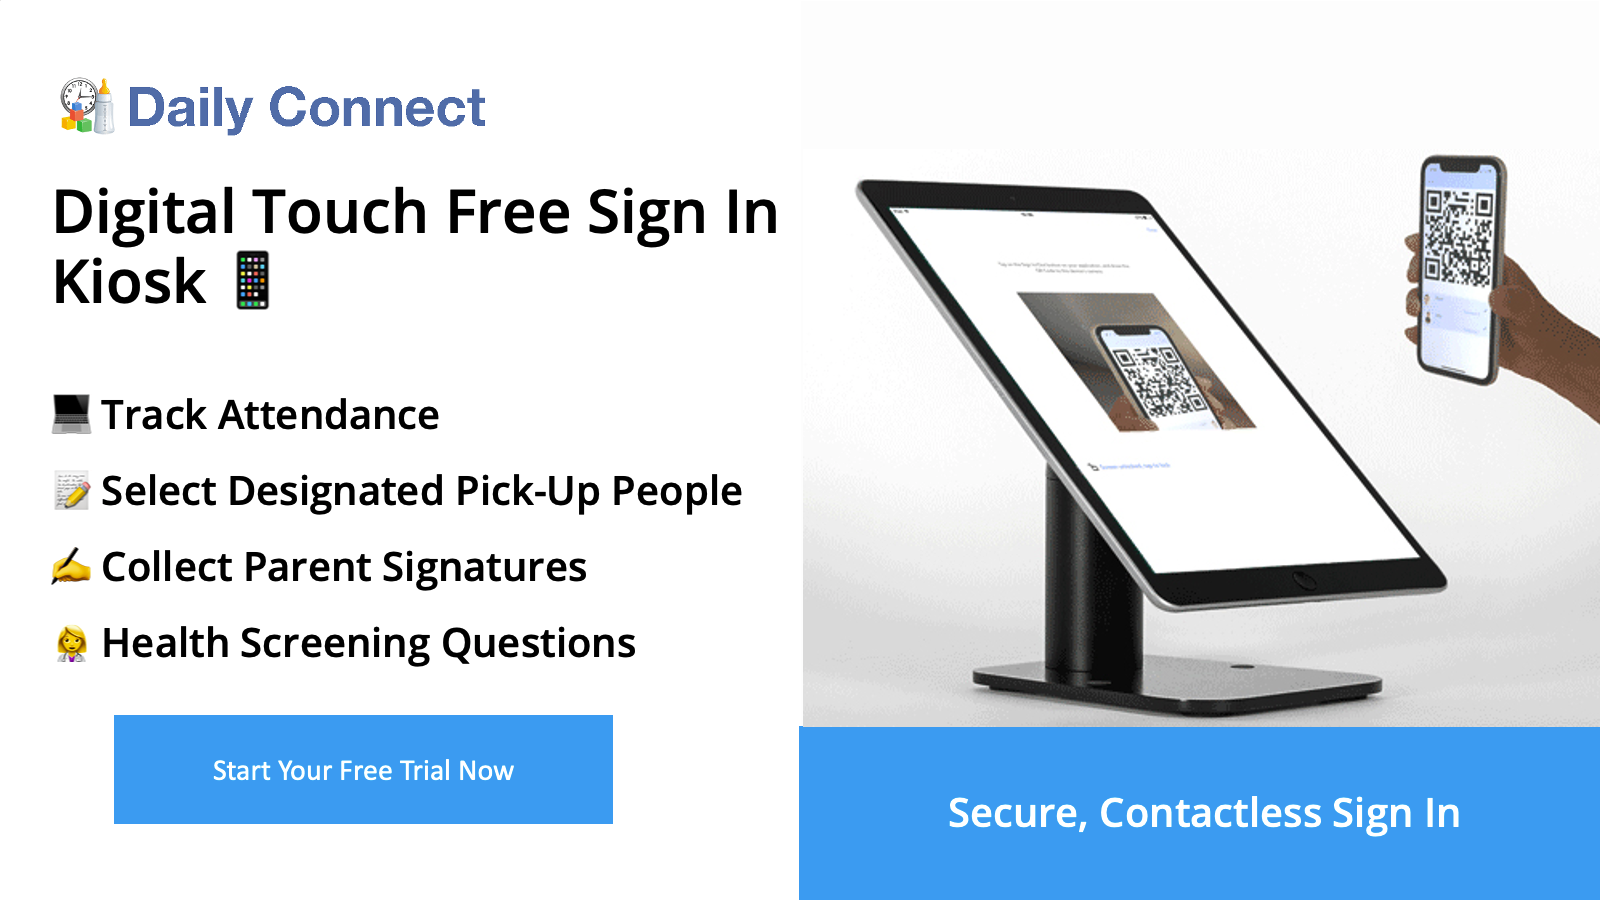 Touch Free Digital Sign In